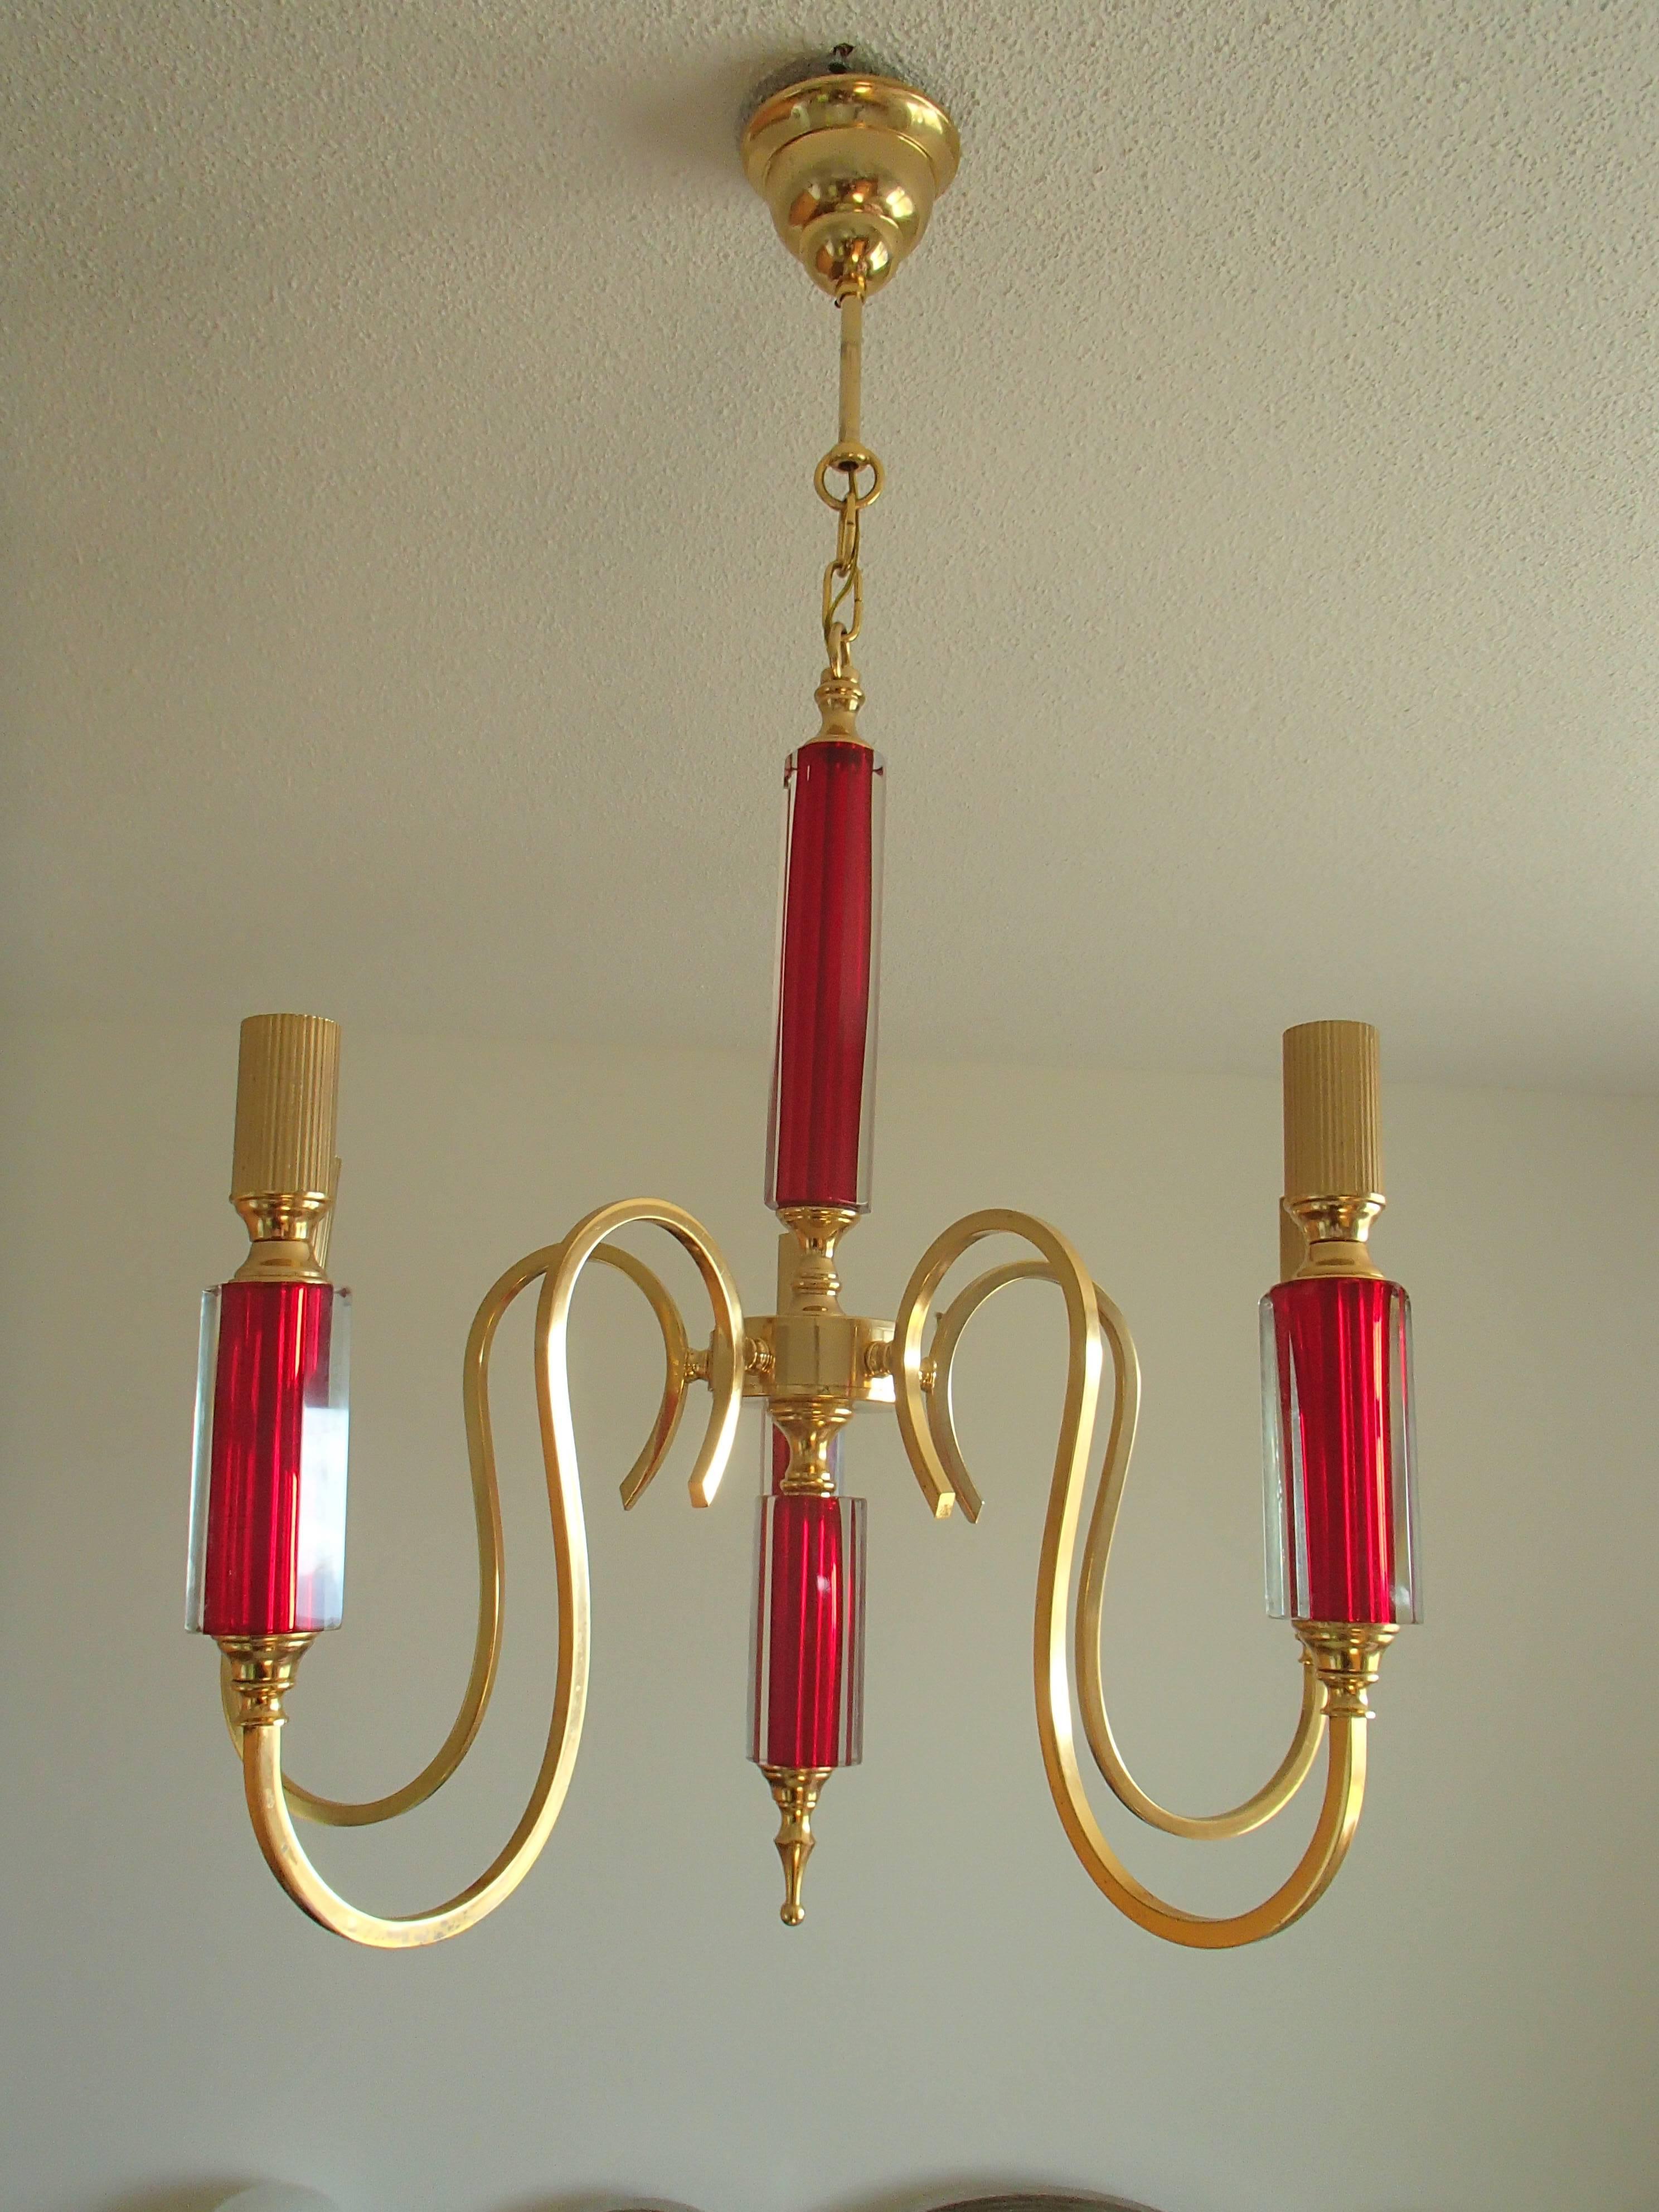 Midcentury five arms chandelier vibrant red Bohemian glass and brass-plated.